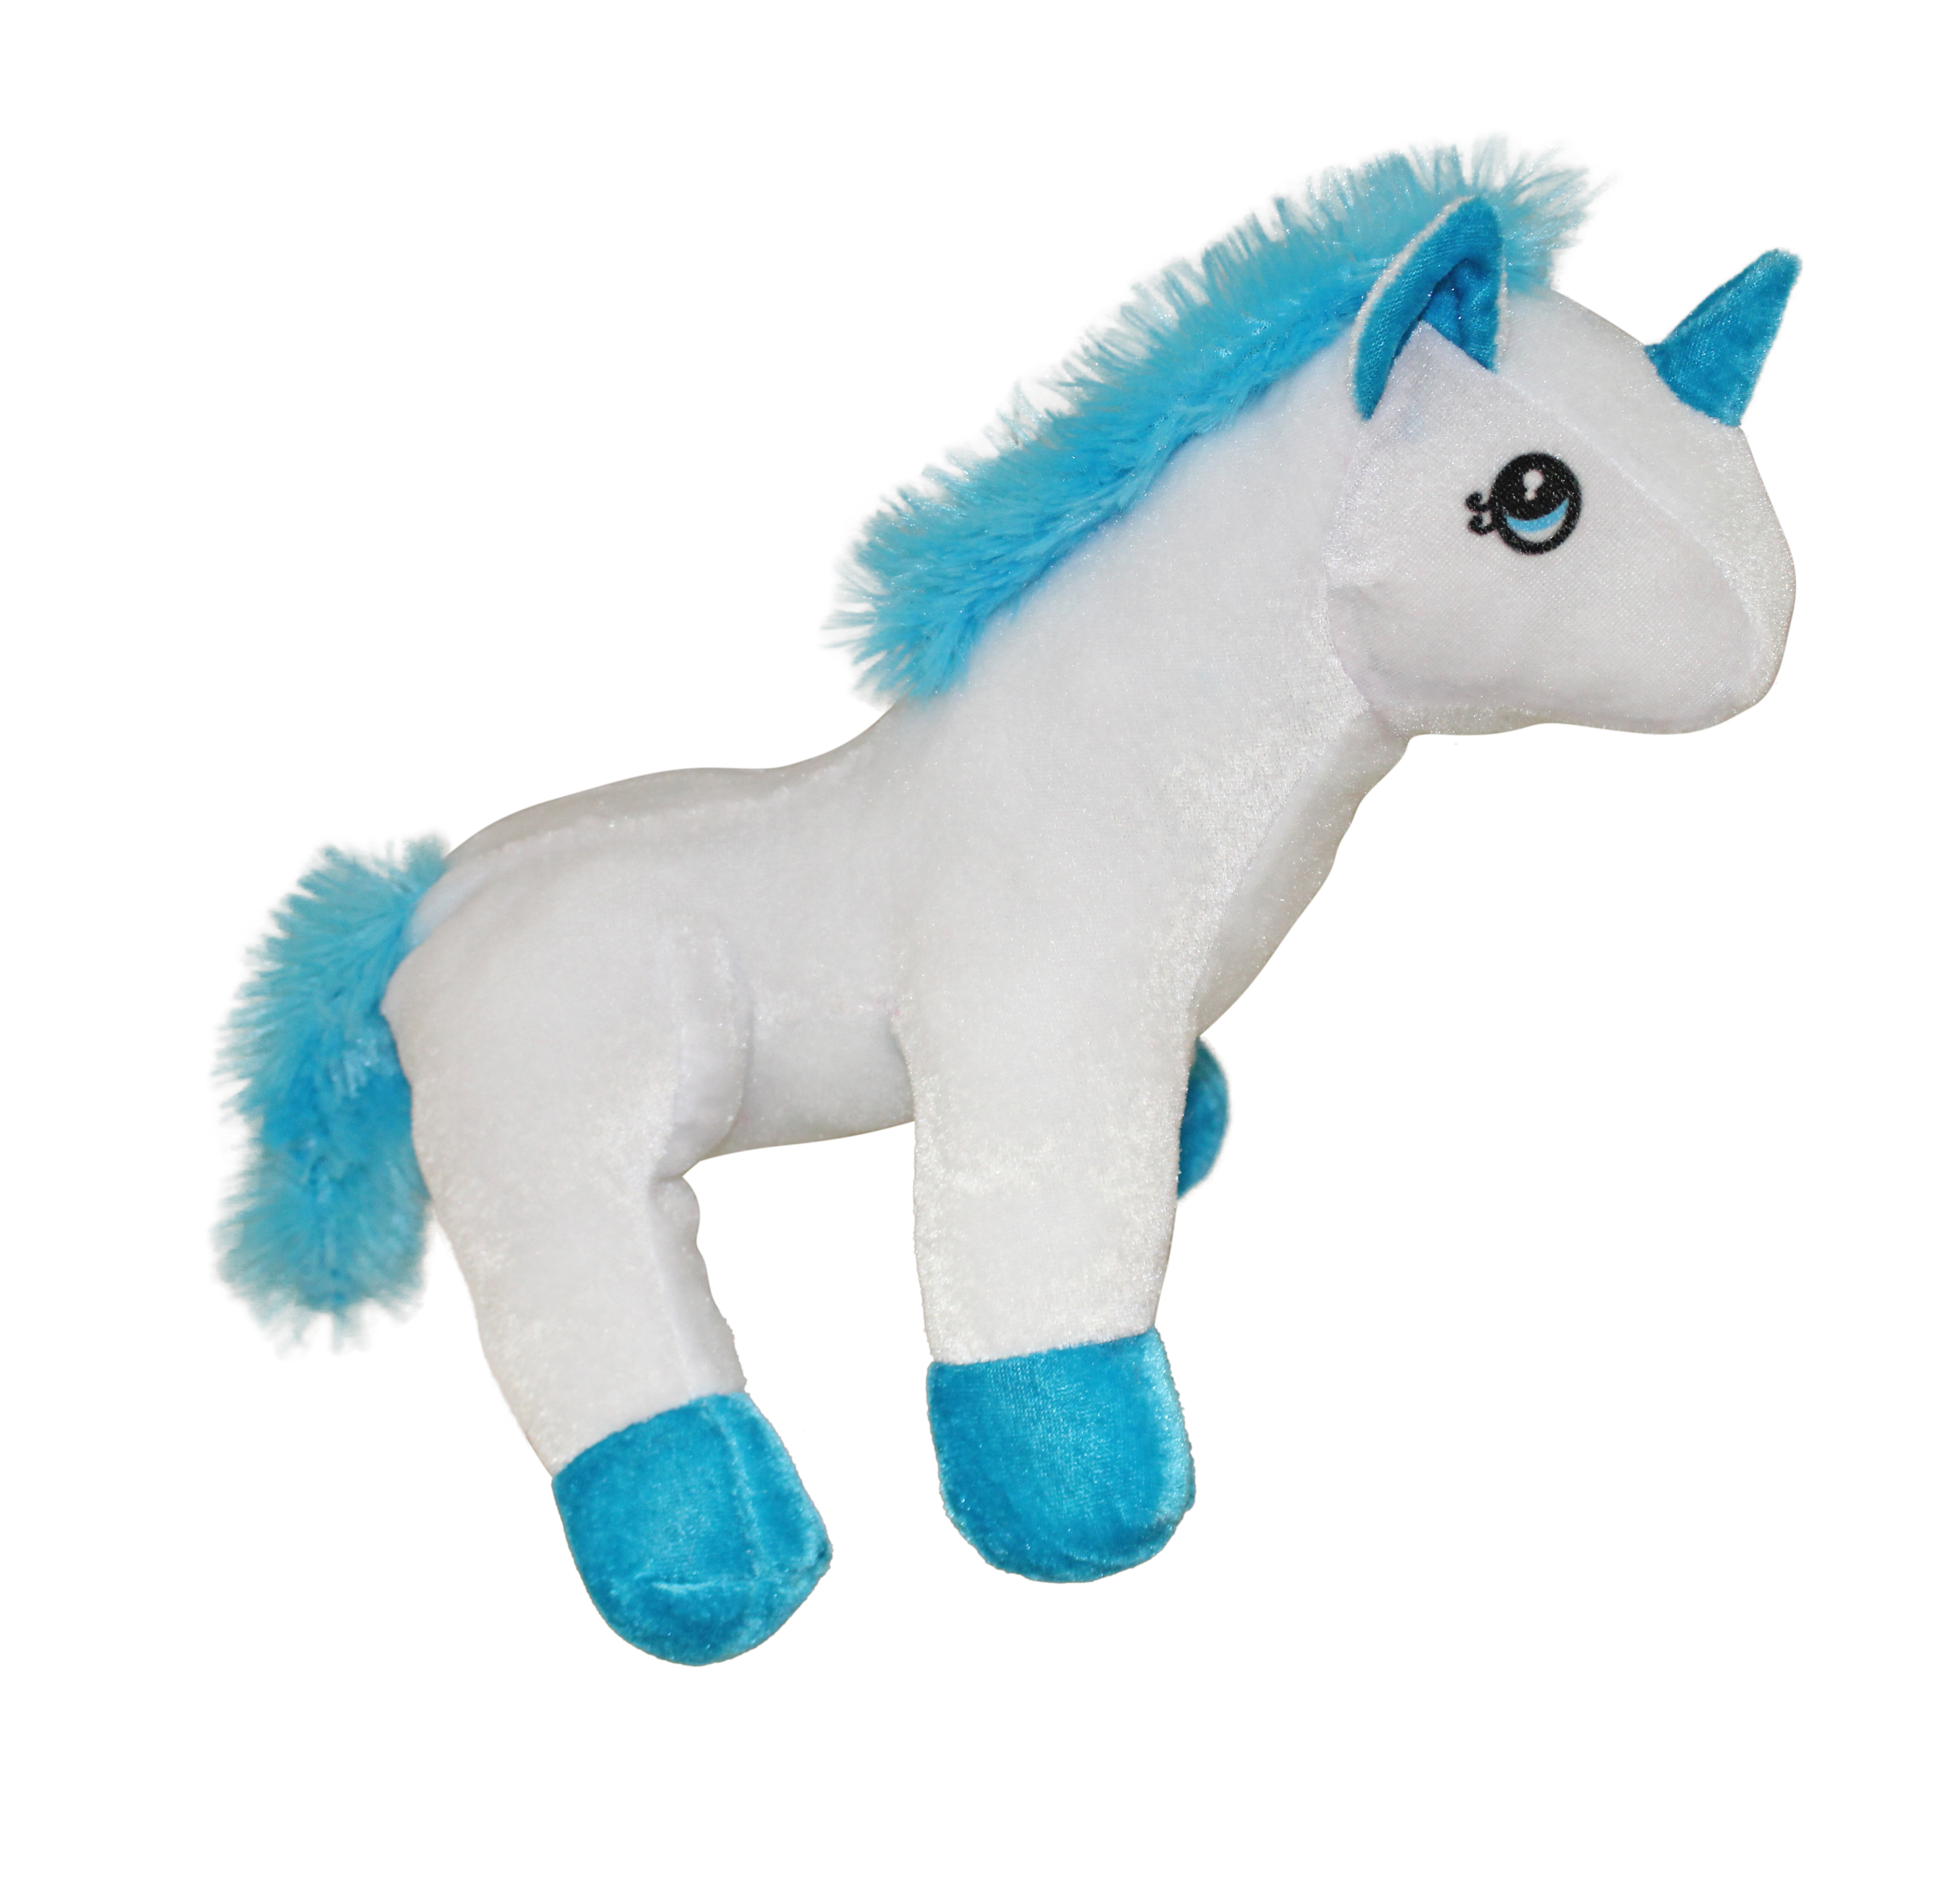 Plush Pal 12" Soft & Fluffy Blue Unicorn Stuffed Animal Toy with Blue Teal Tail And Mane - image 1 of 6